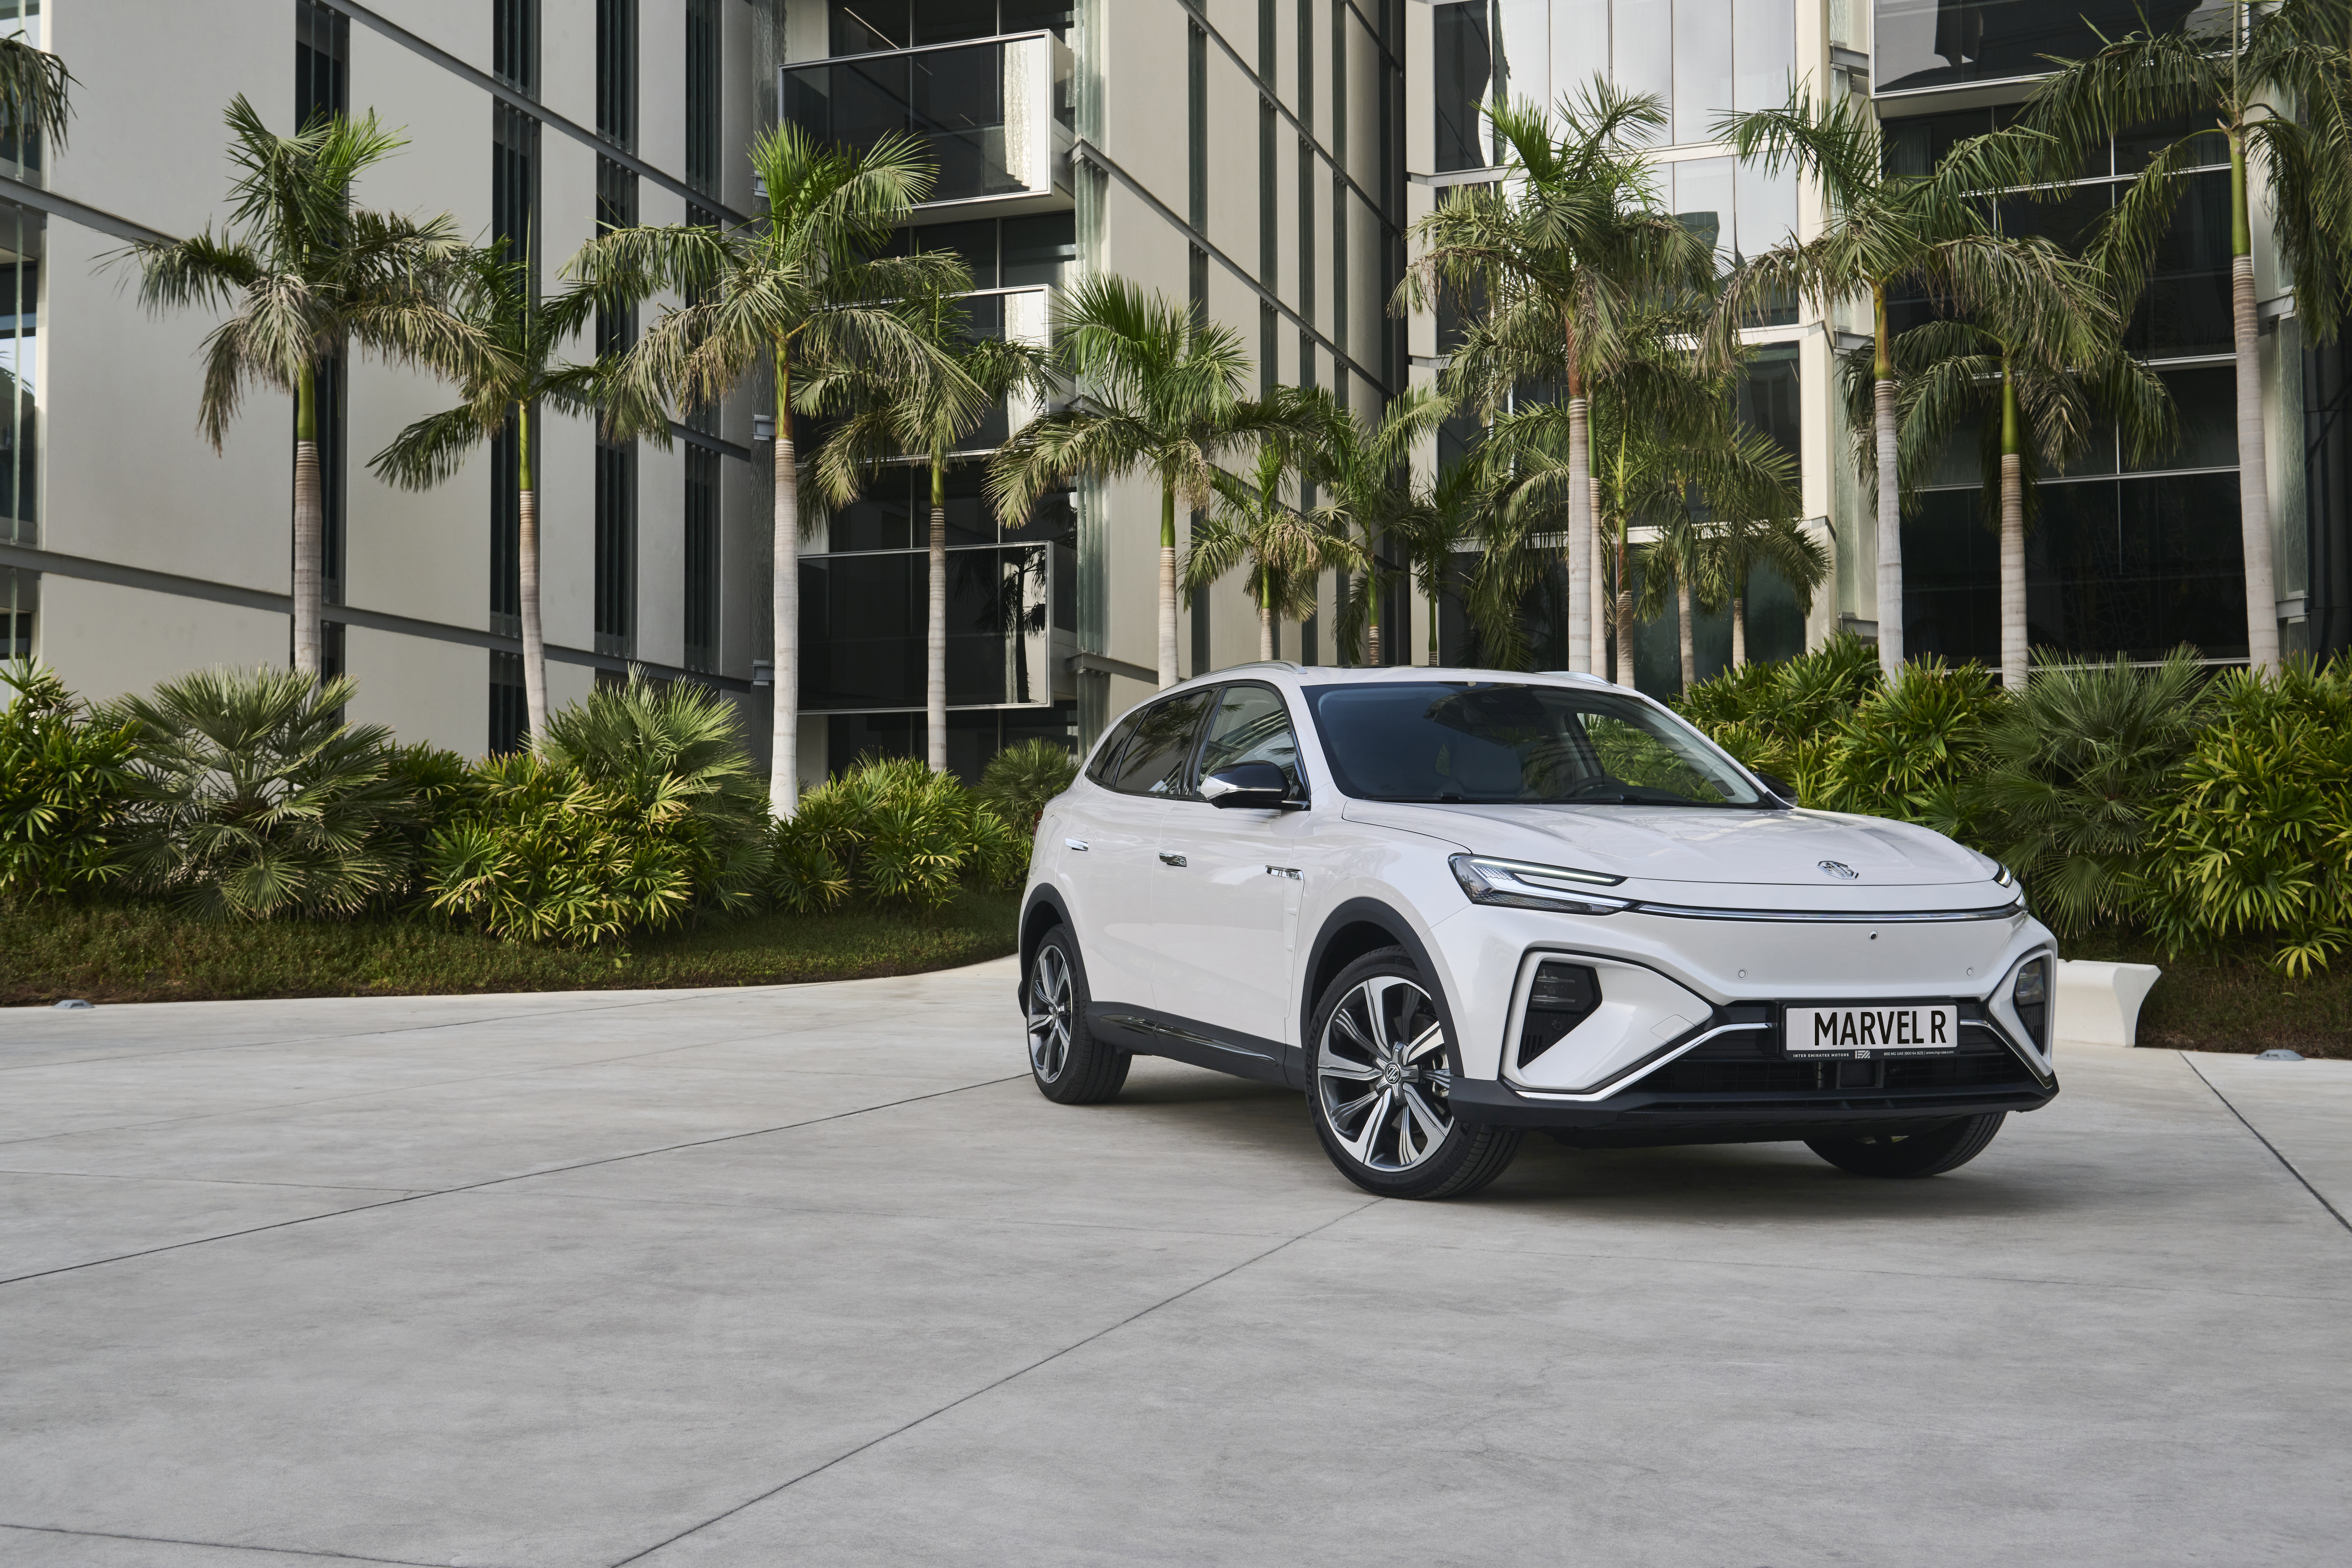 MG’s Marvel R is Pushed to the Limits in the Hot Weather of the Middle East